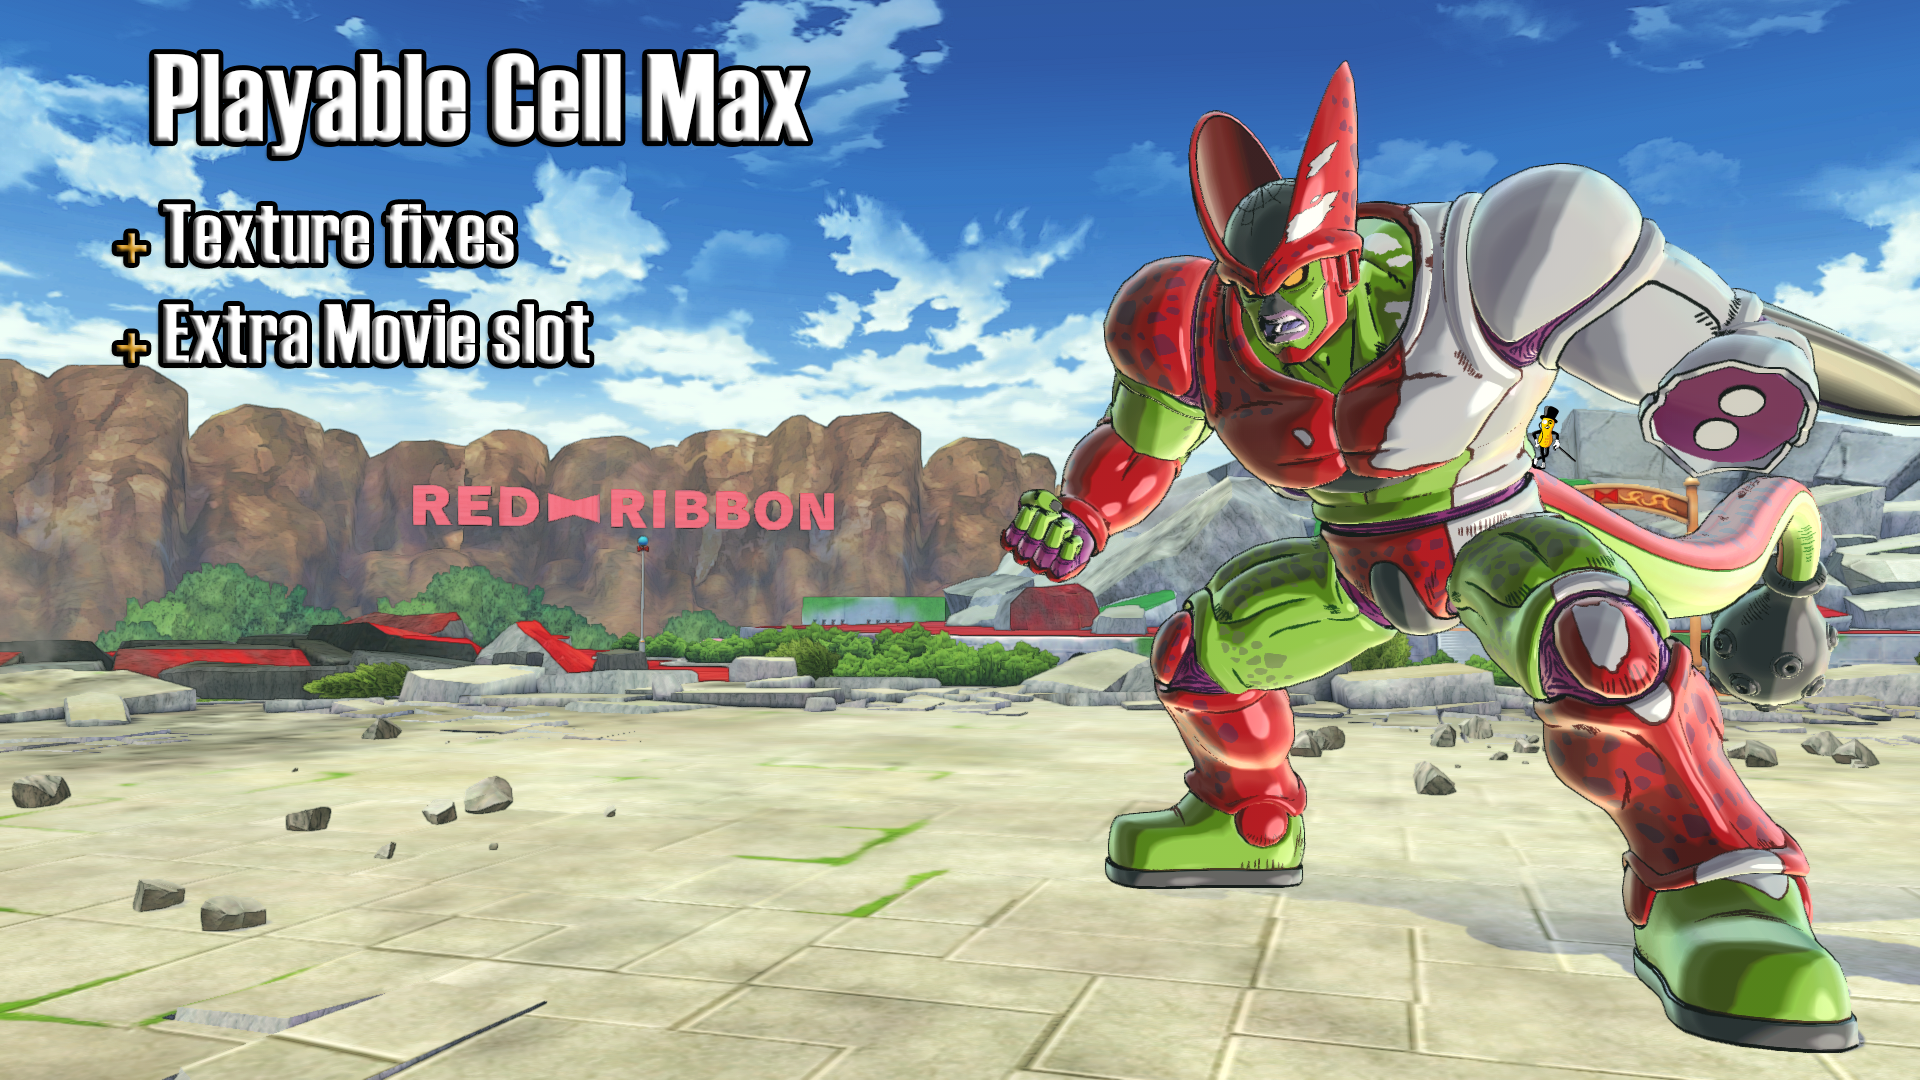 Playable Cell Max